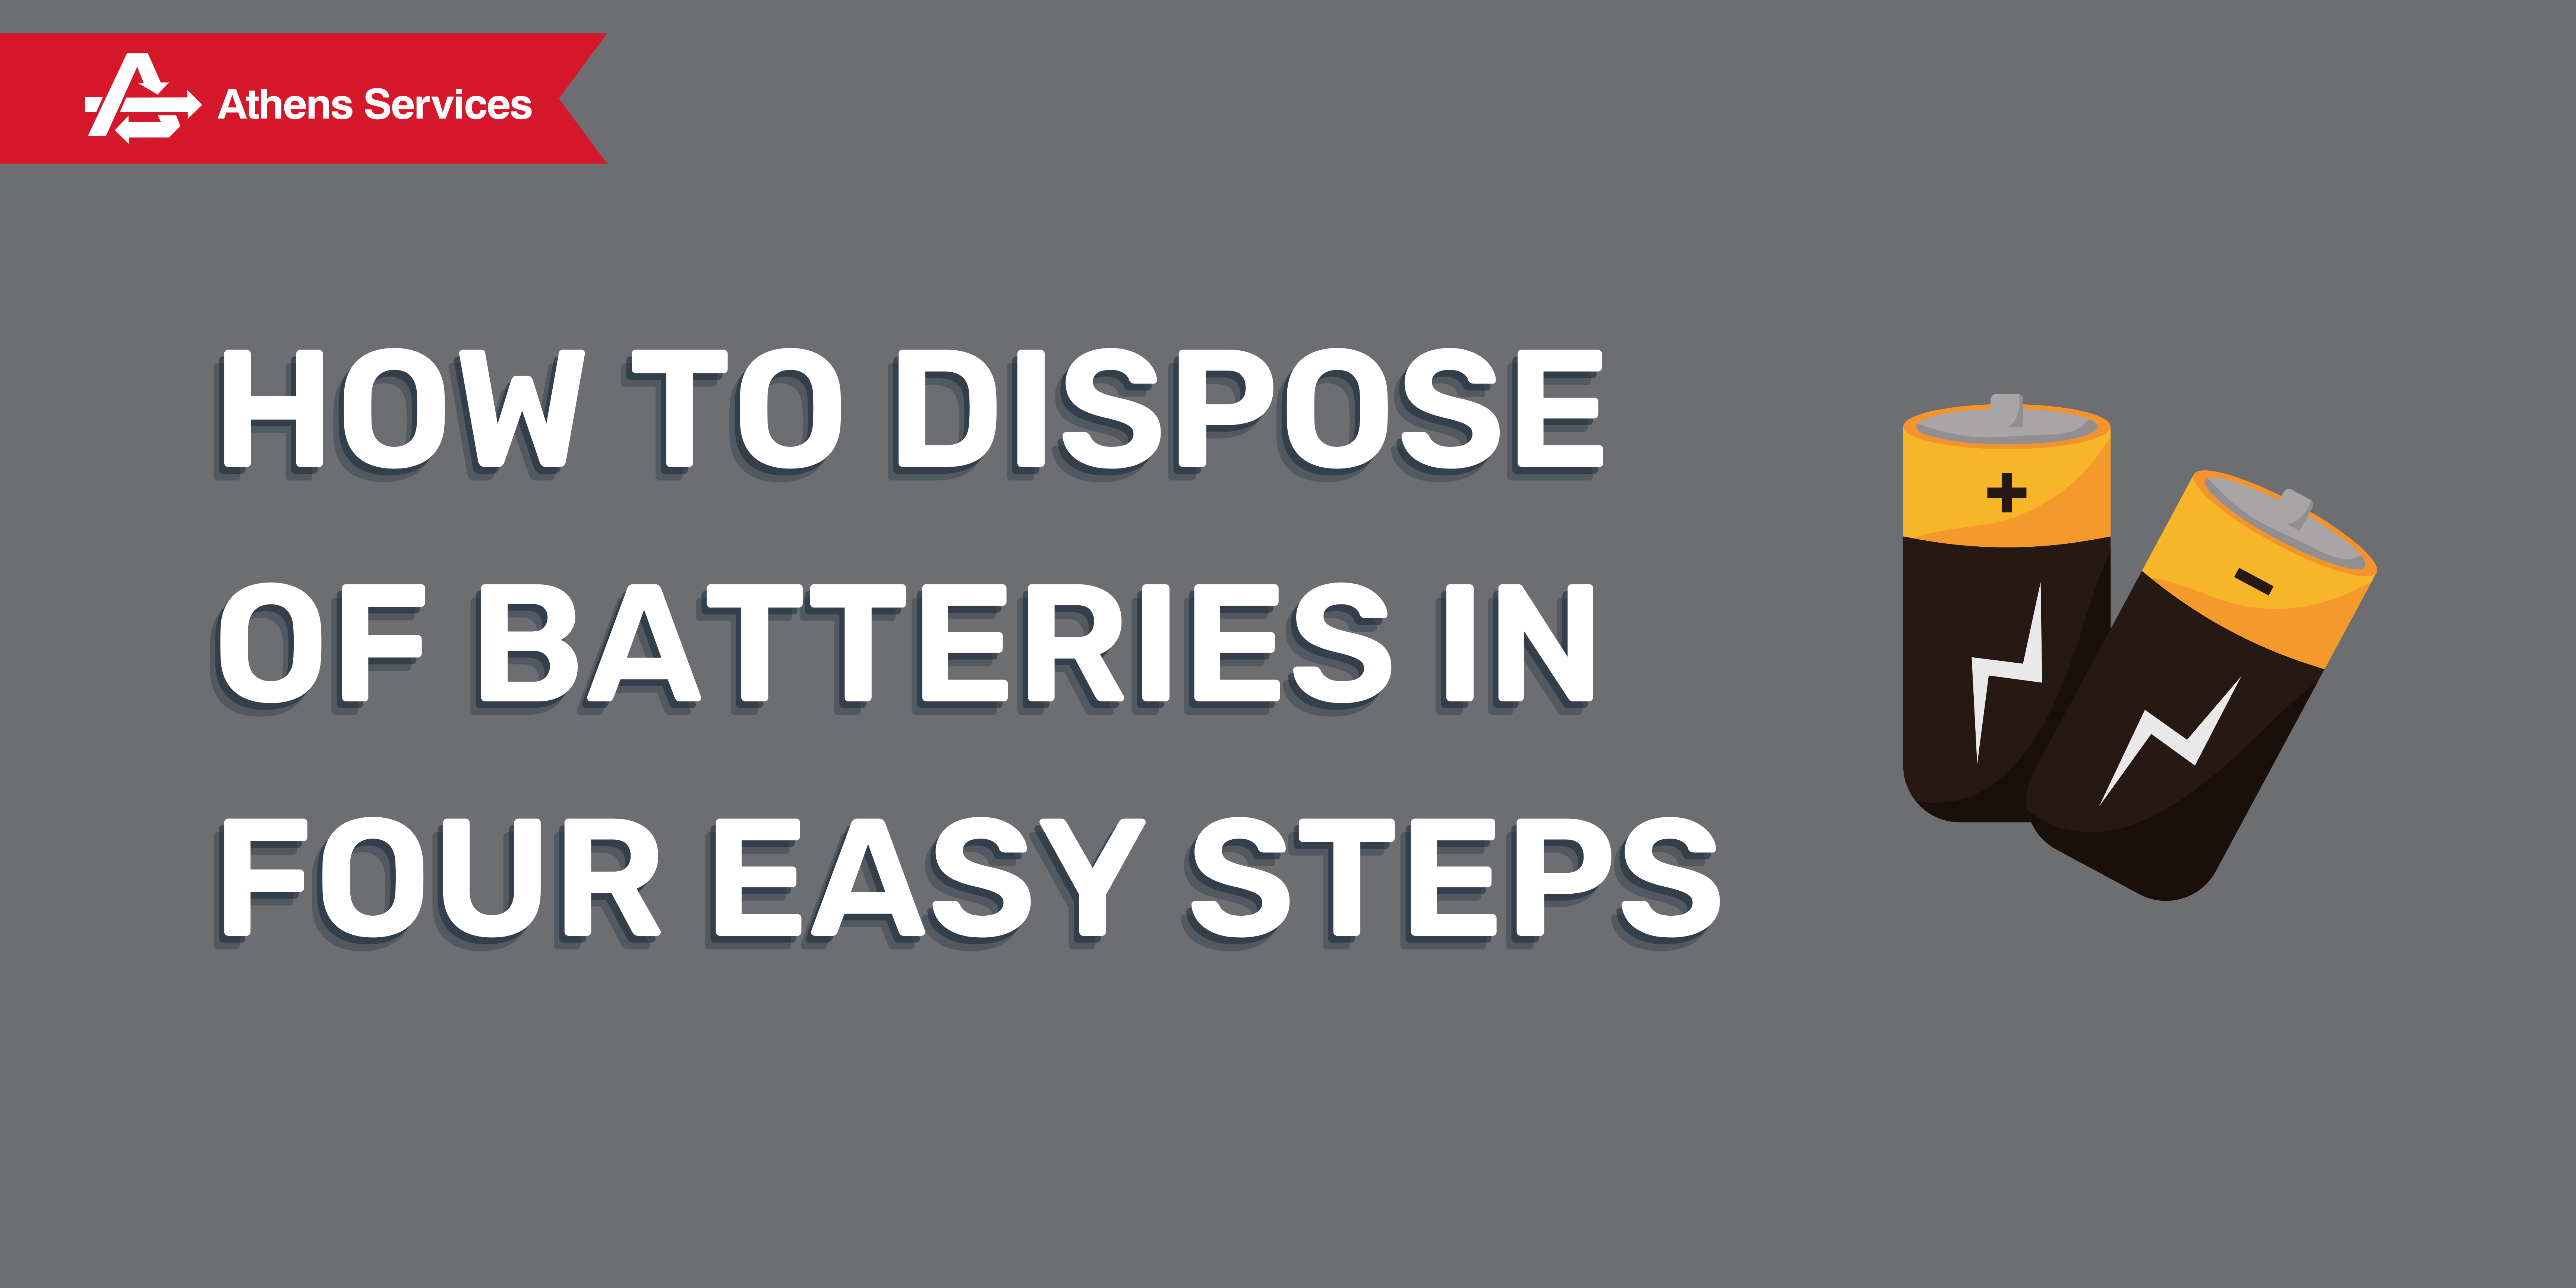 How to dispose of Batteries in Four Easy Steps